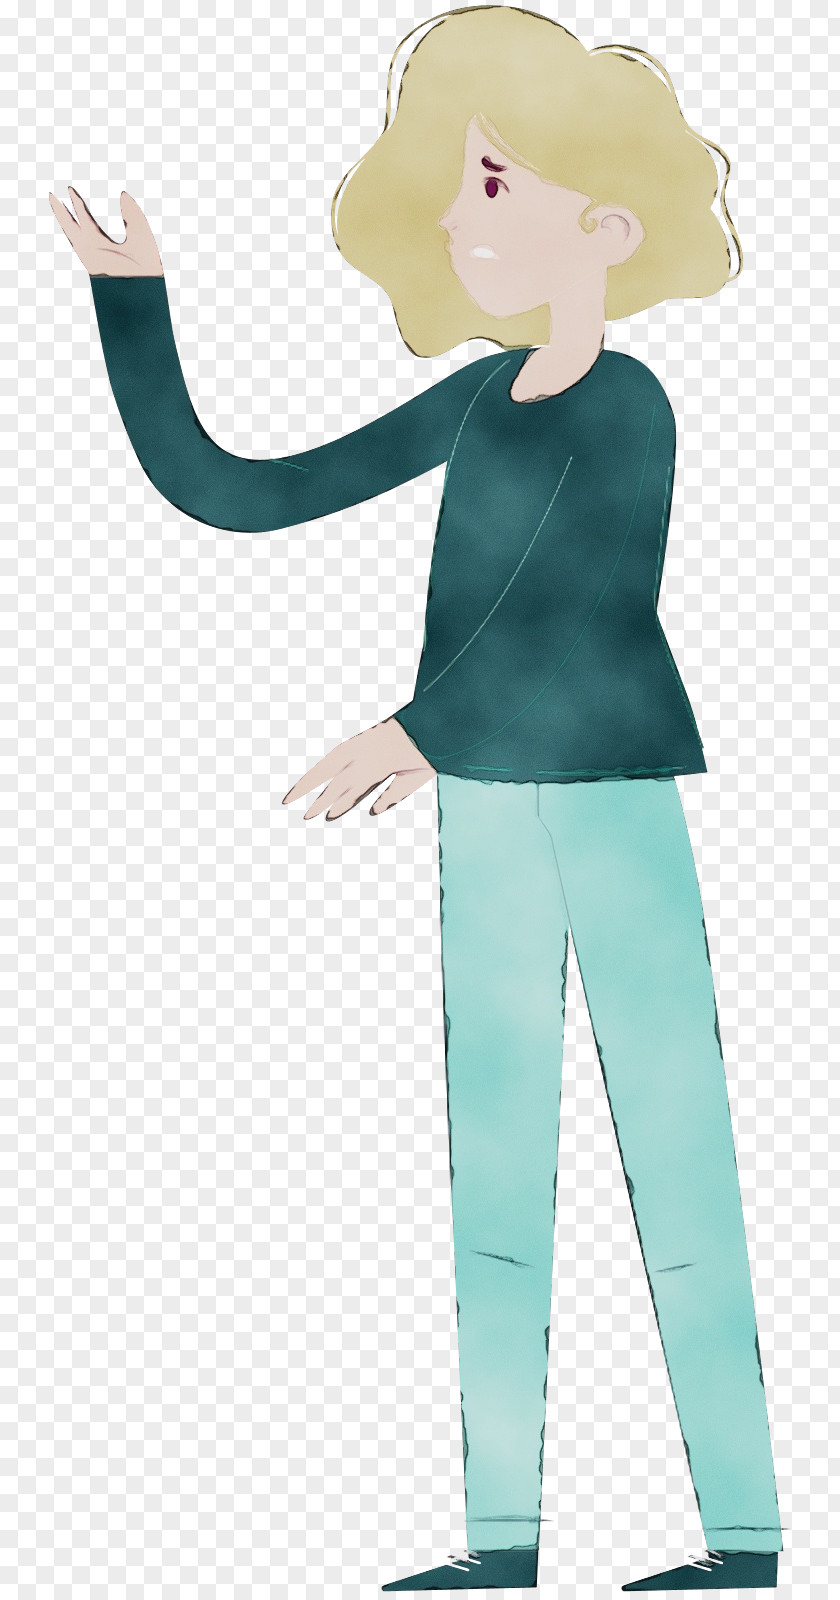 Character Clothing Cartoon Teal Figurine PNG